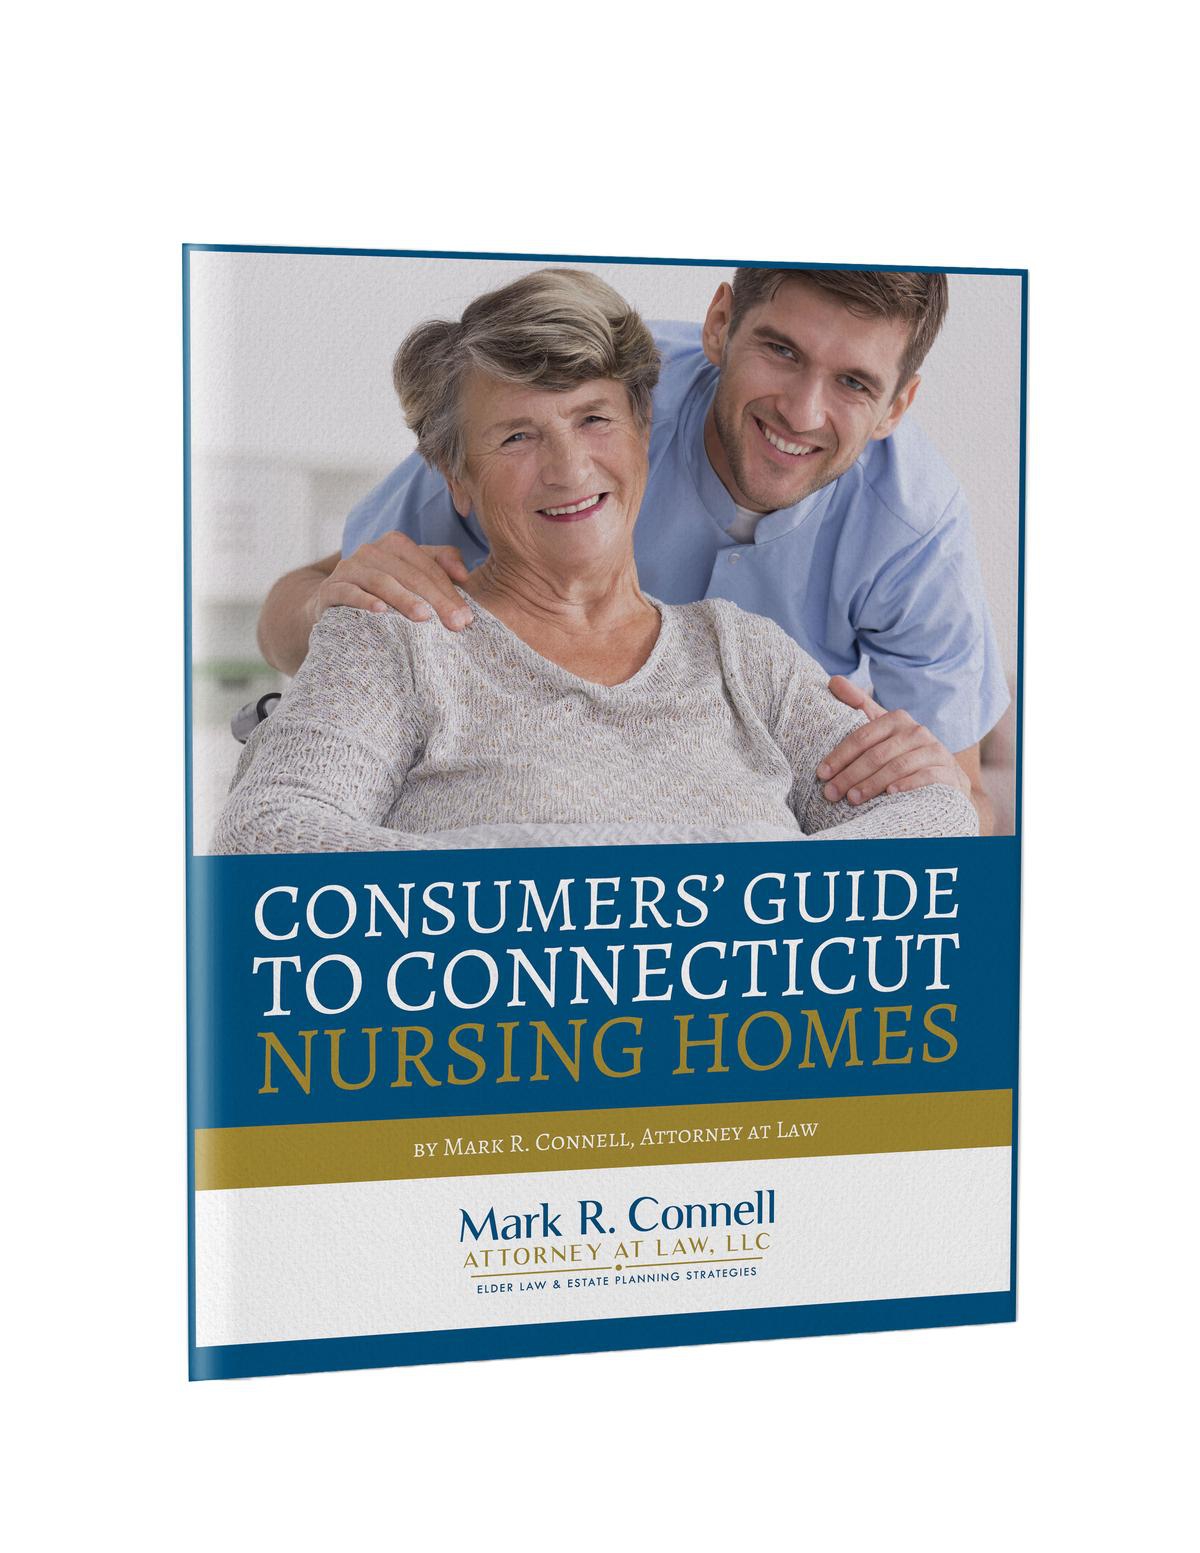 Consumers’ Guide to Connecticut Nursing Homes